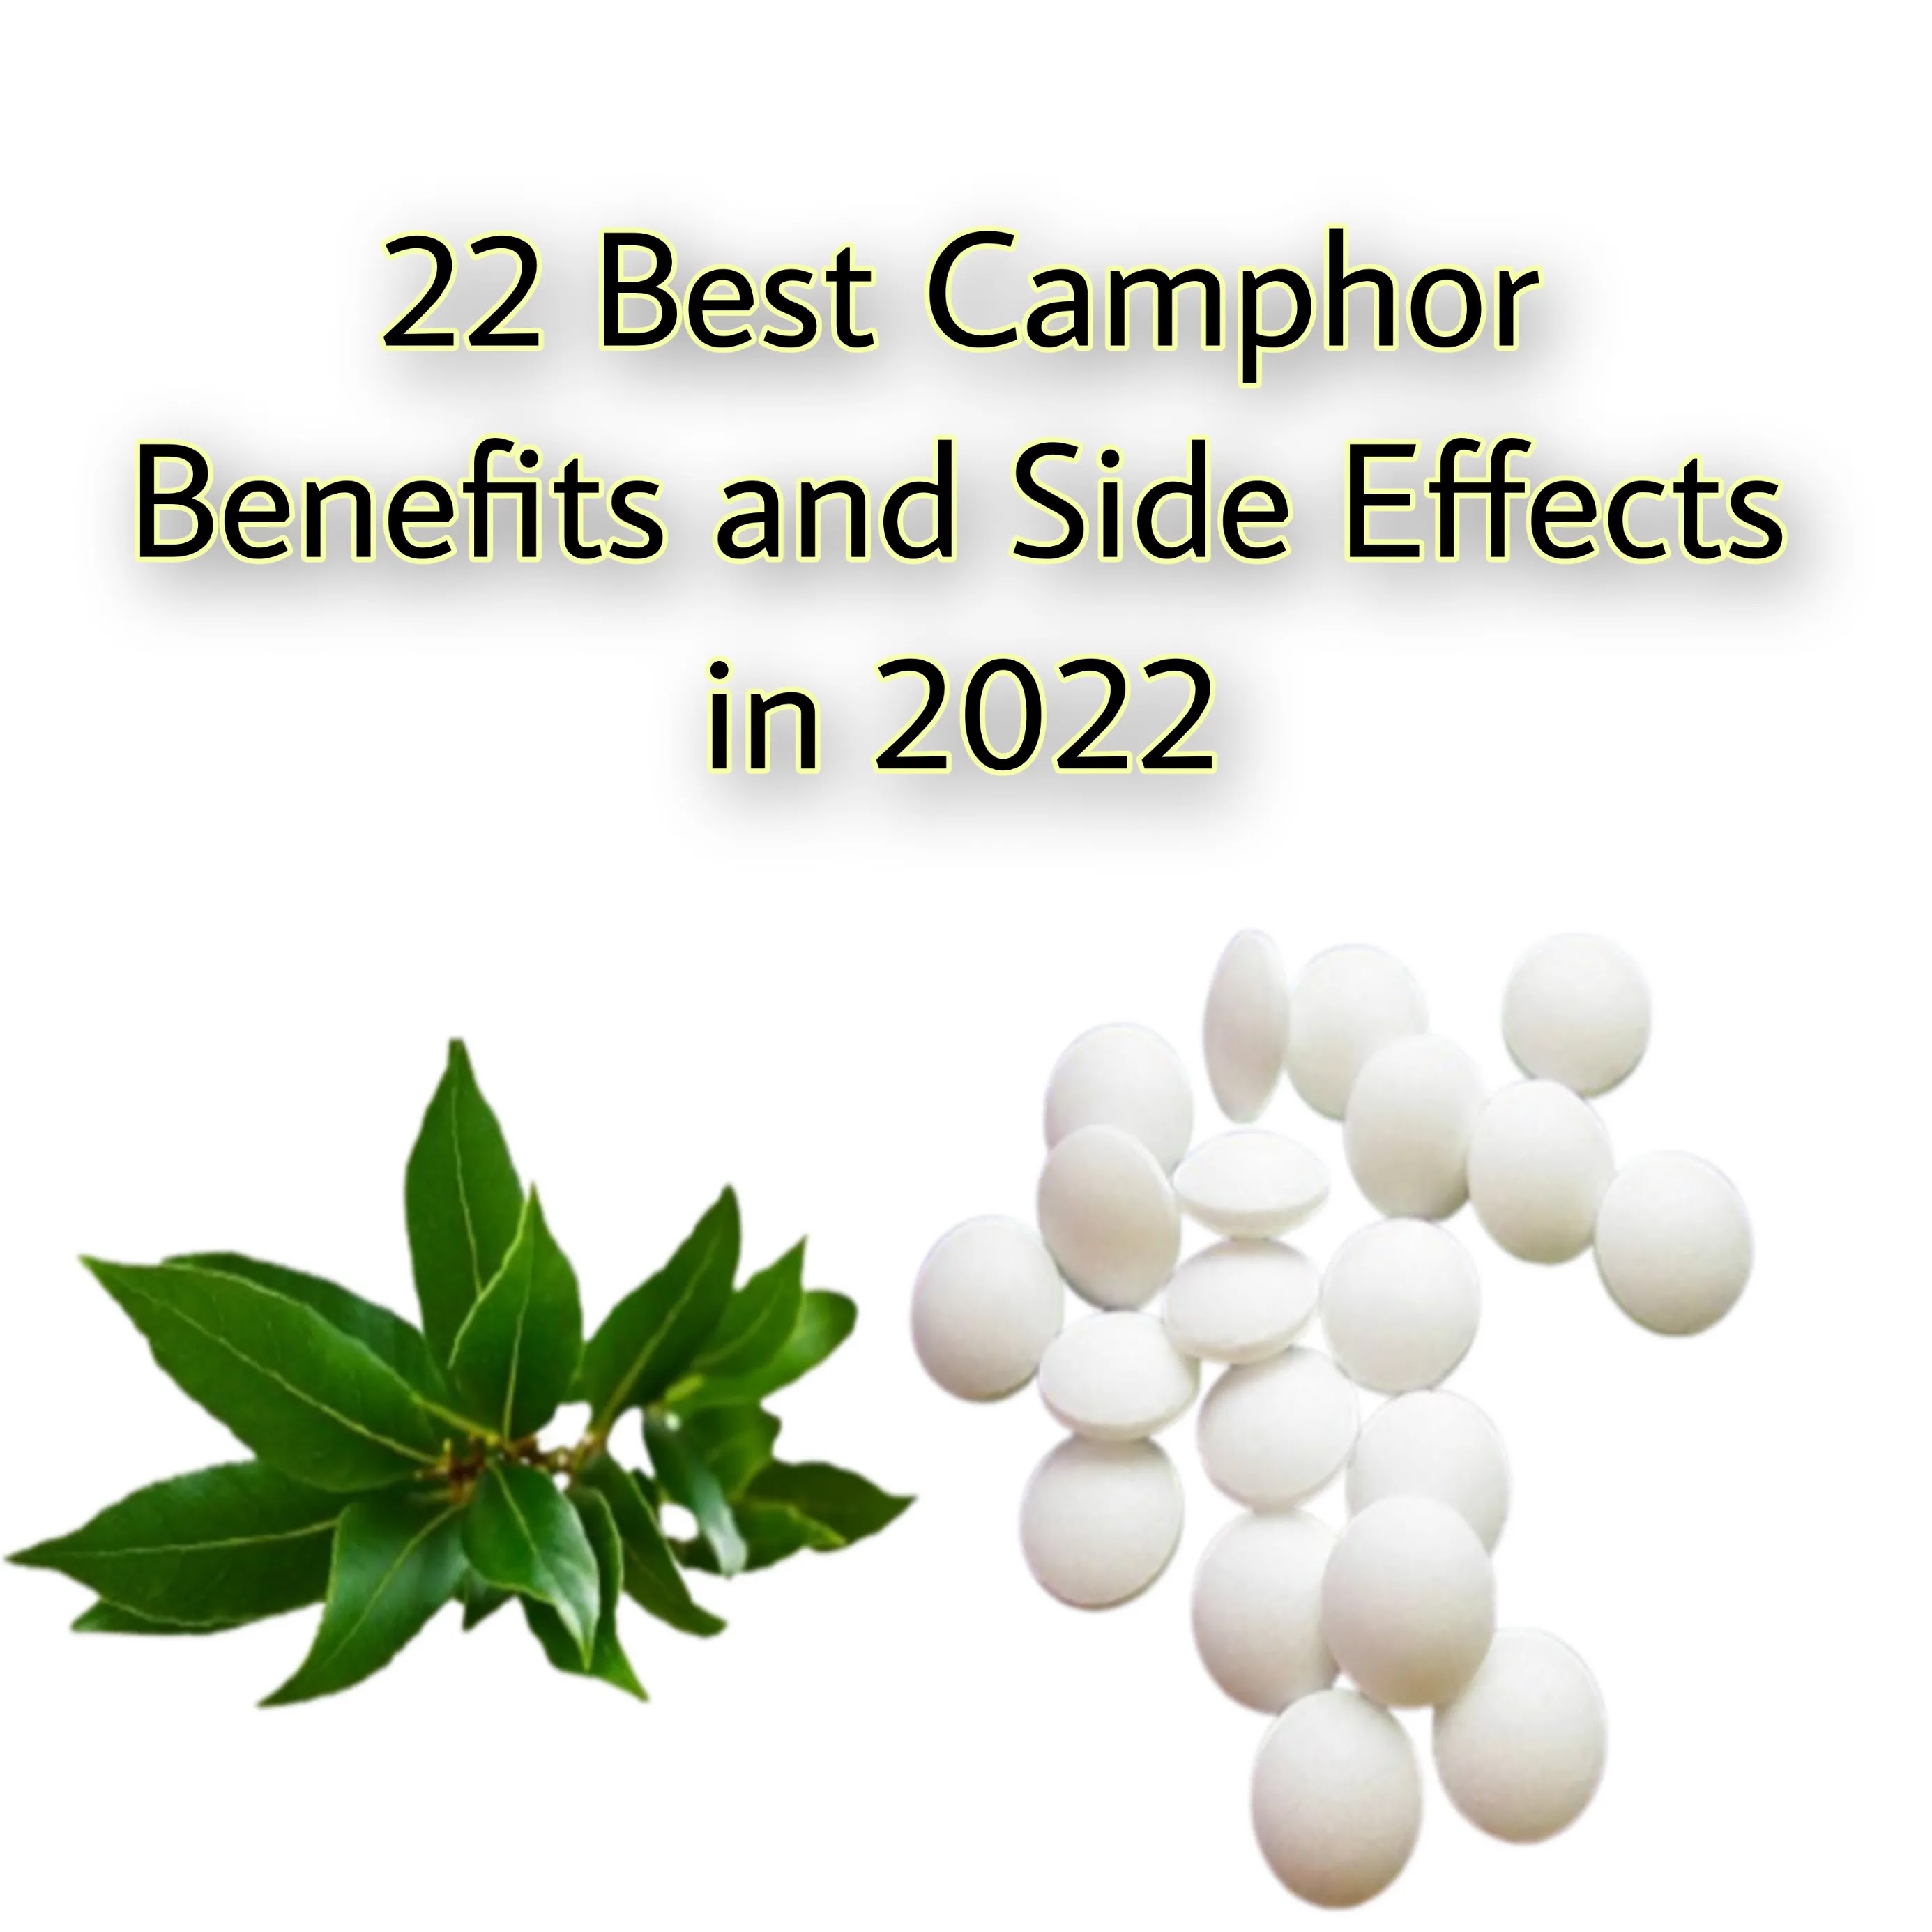 Camphor Benefits and Side Effects in 2022